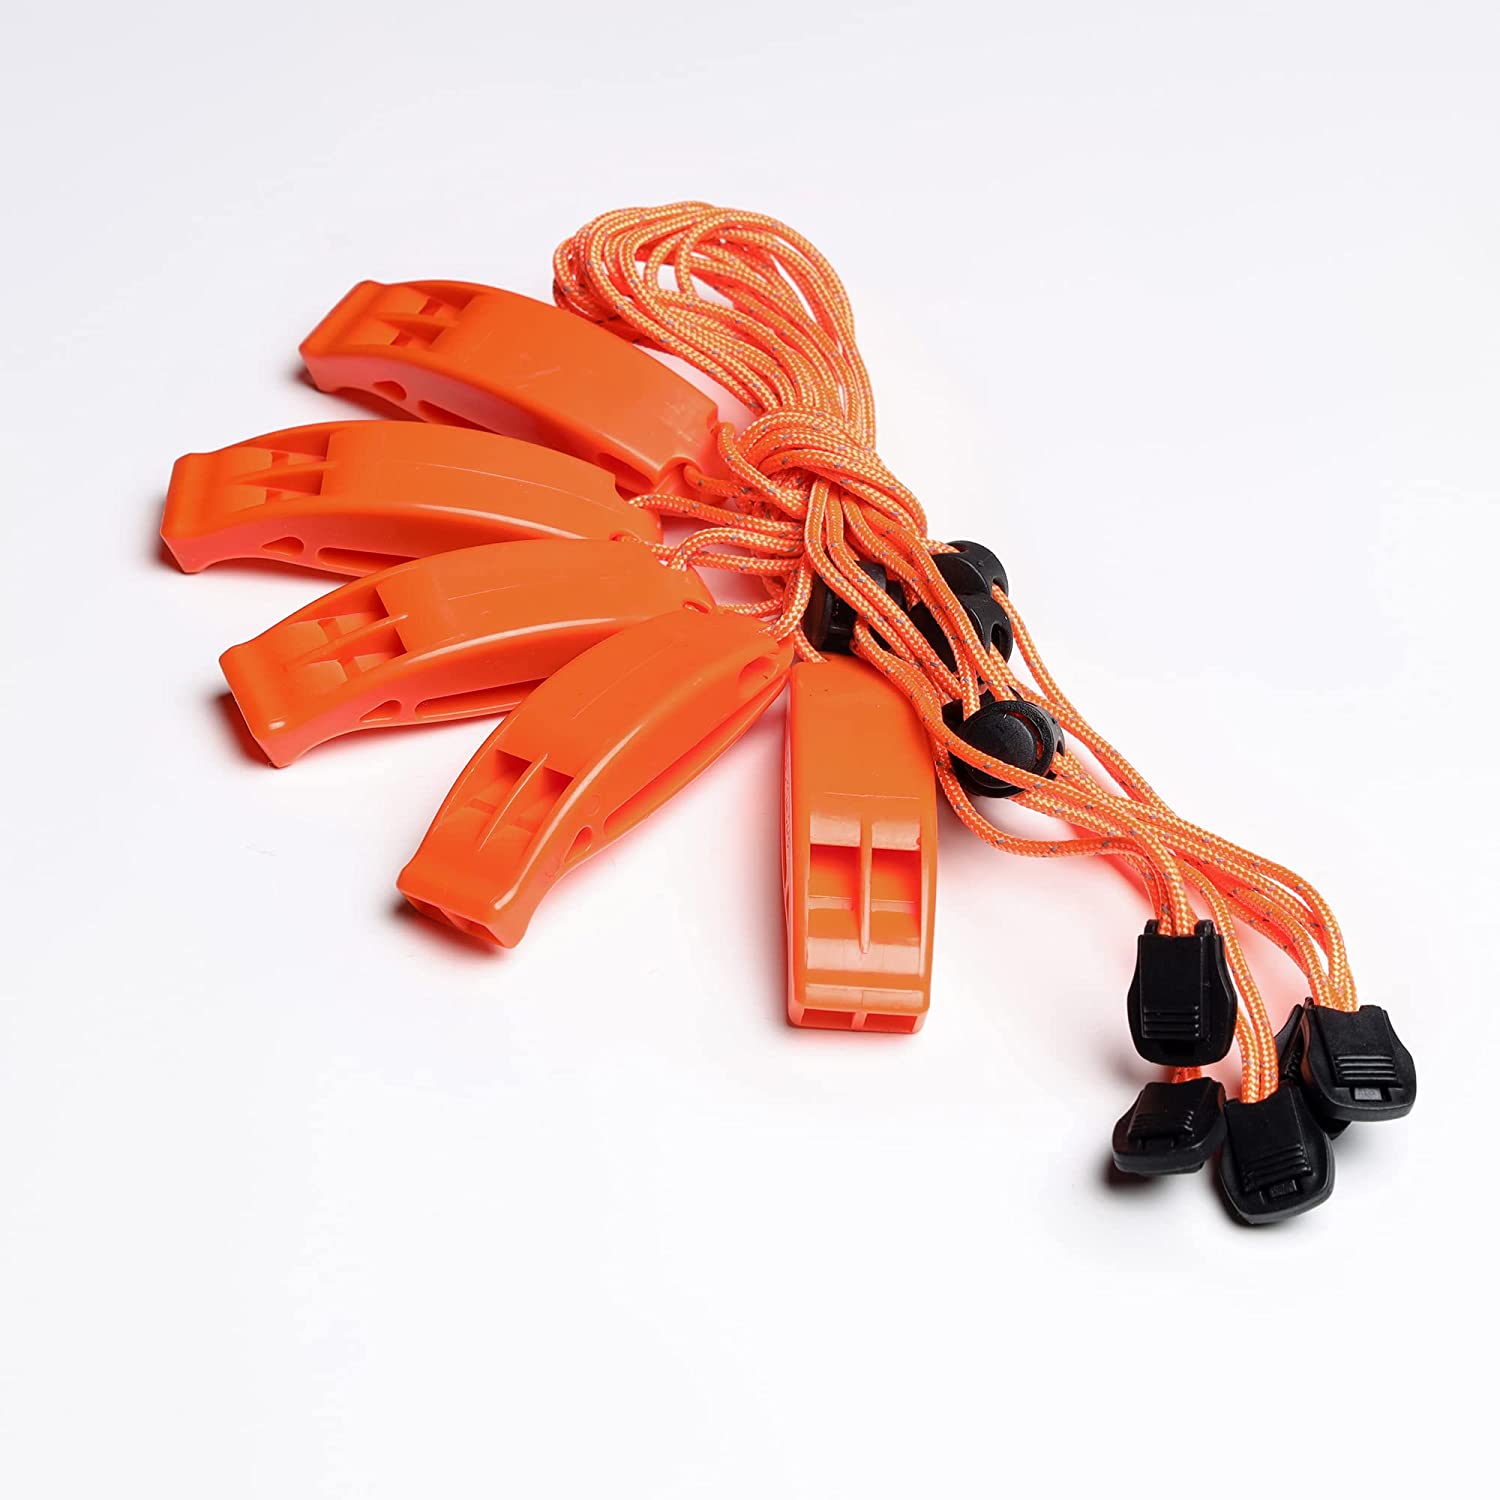 FERROFIRE Emergency Whistles with Lanyard Safety Whistle Survival Shrill Loud Blast for Kayak Life Vest Jacket Boating Fishing Boat Camping Hiking Rescue Signaling Lifeguard Plastic (Pack of 5)